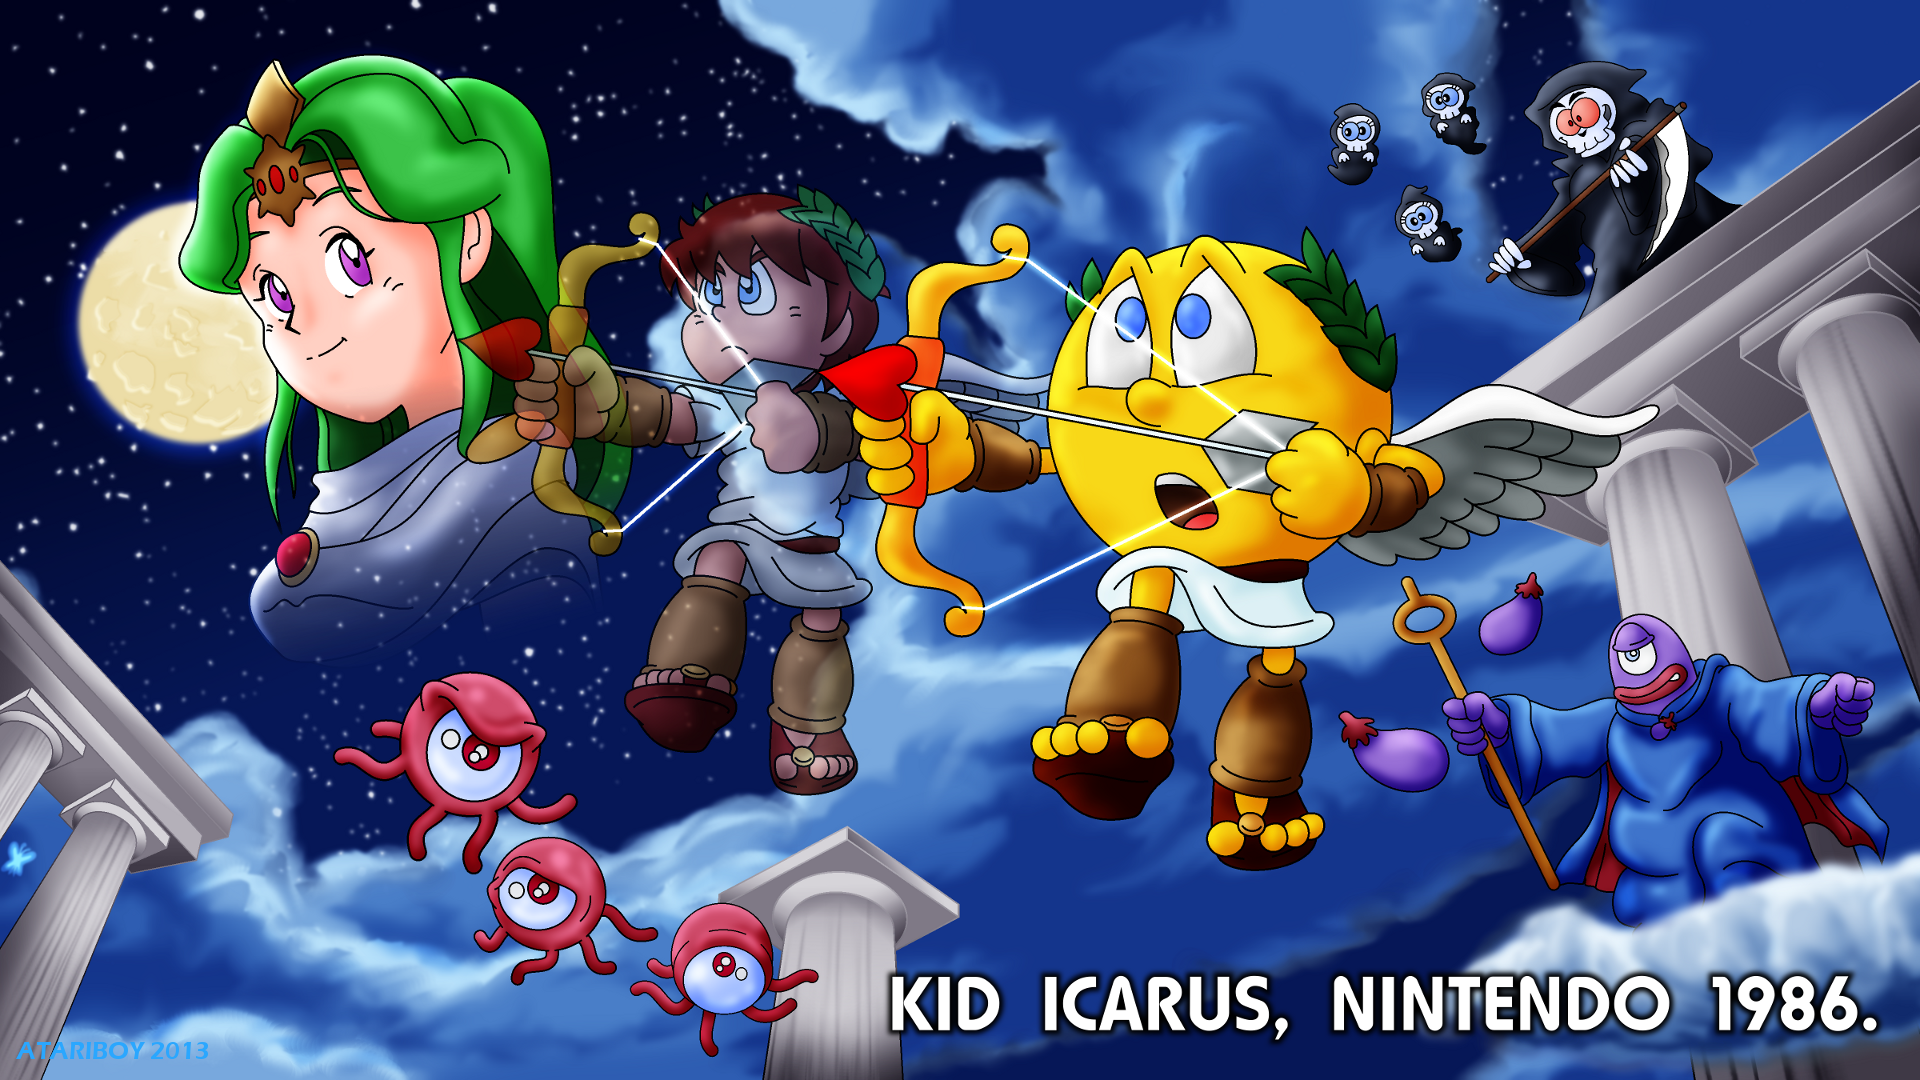 pacman_fanfic___kid_icarus_1986__by_atar